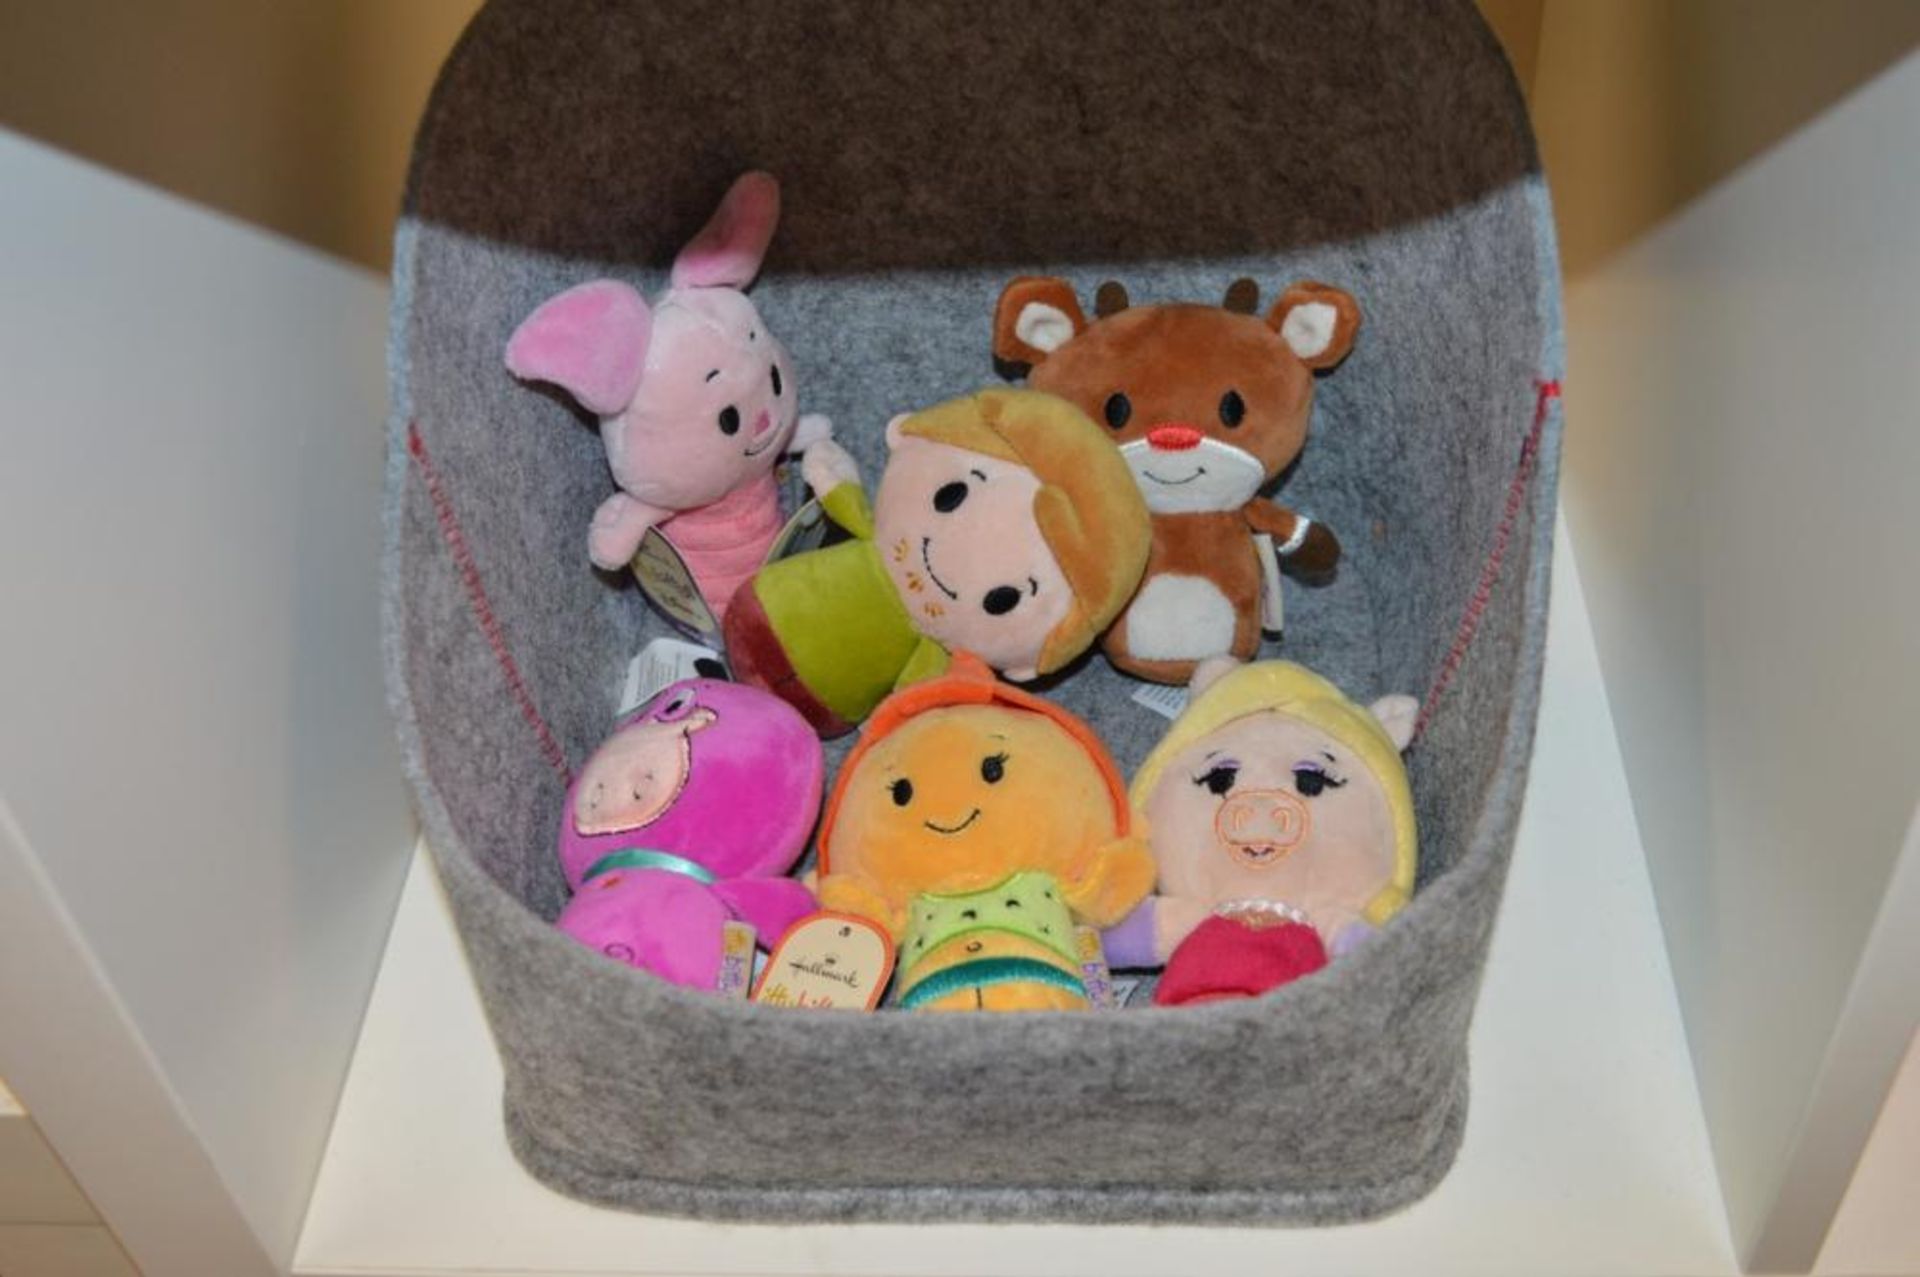 Approx 100 x Hallmark Itty Bittsy Character Soft Toys With 18 x Storage Baskets - Ref BB - CL351 - L - Image 6 of 19